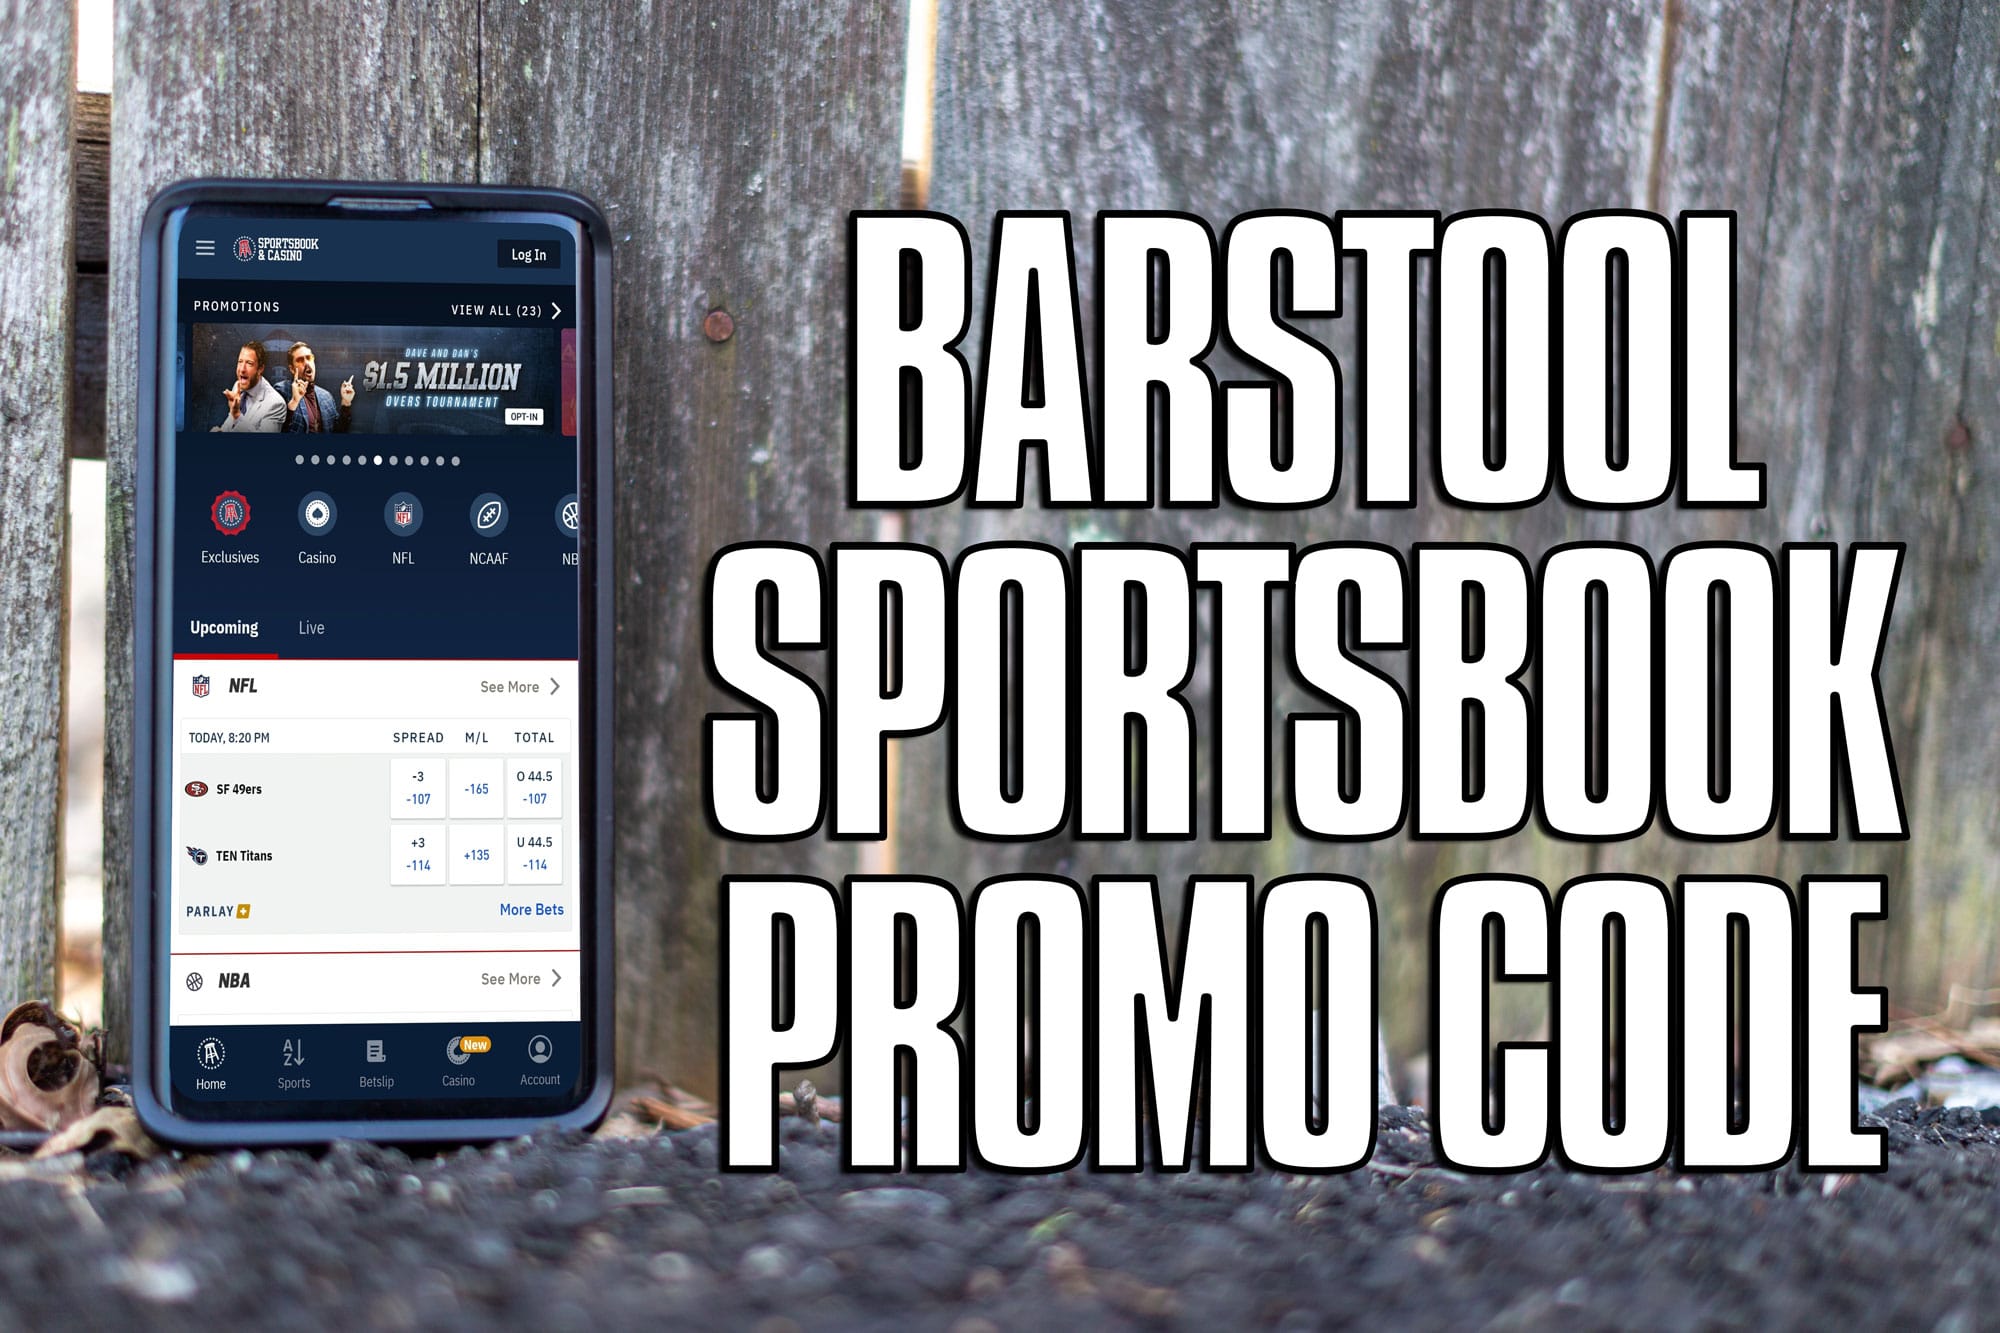 Barstool Sportsbook Promo Code Dominates Weekend With Awesome Specials